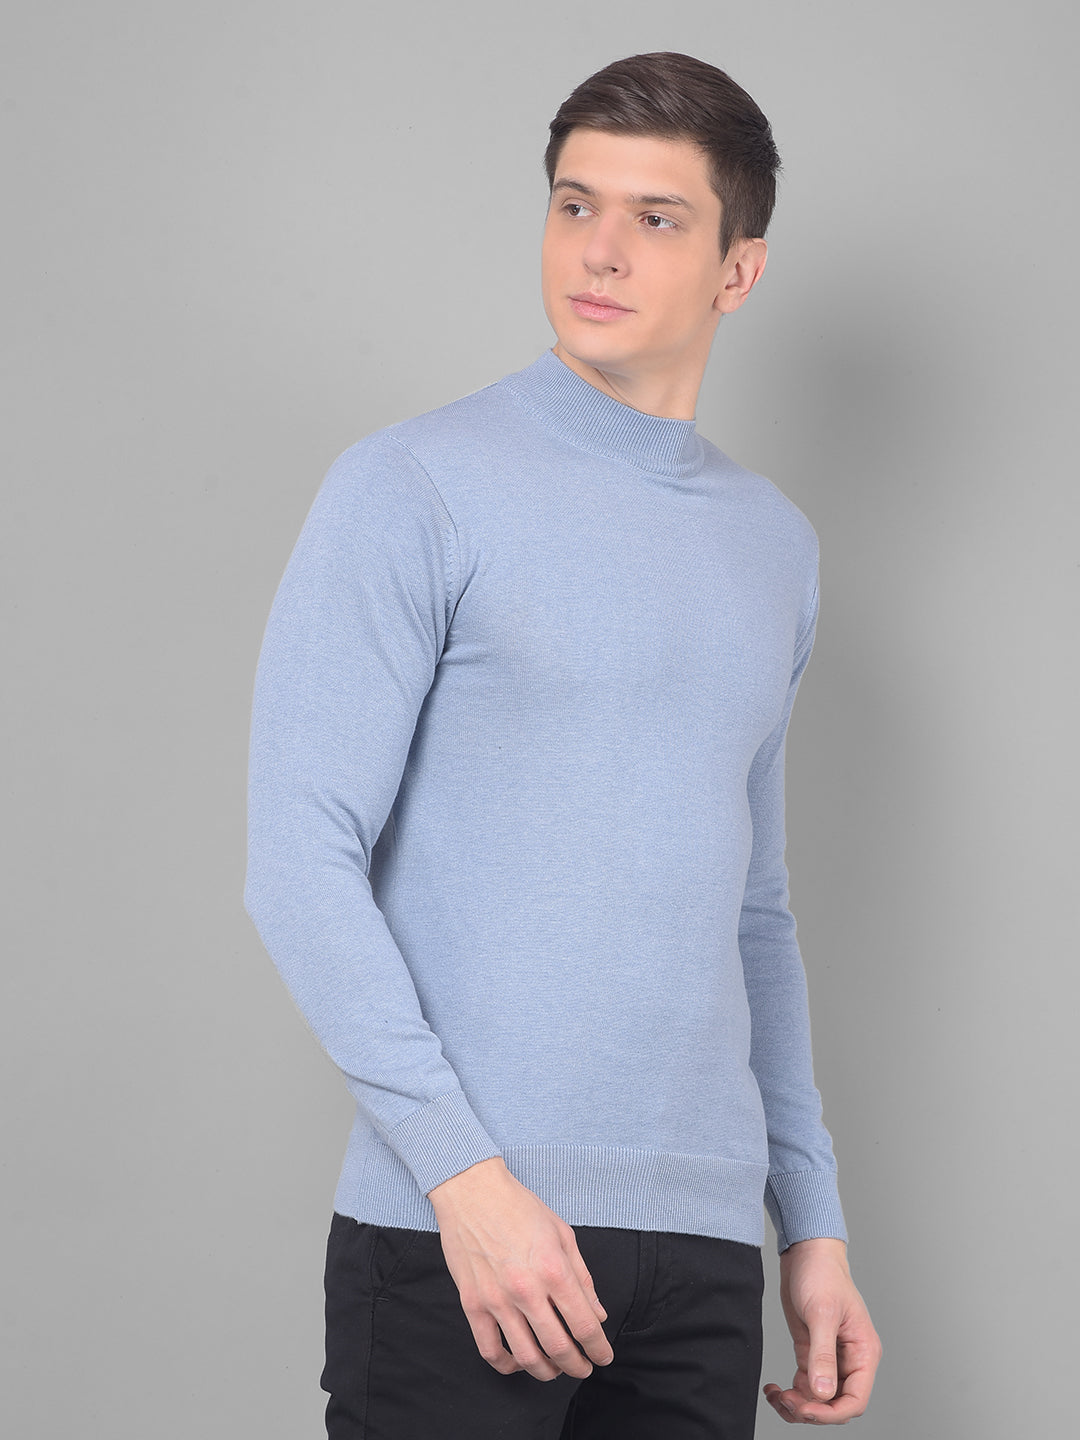 cobb solid sky blue high neck sweater